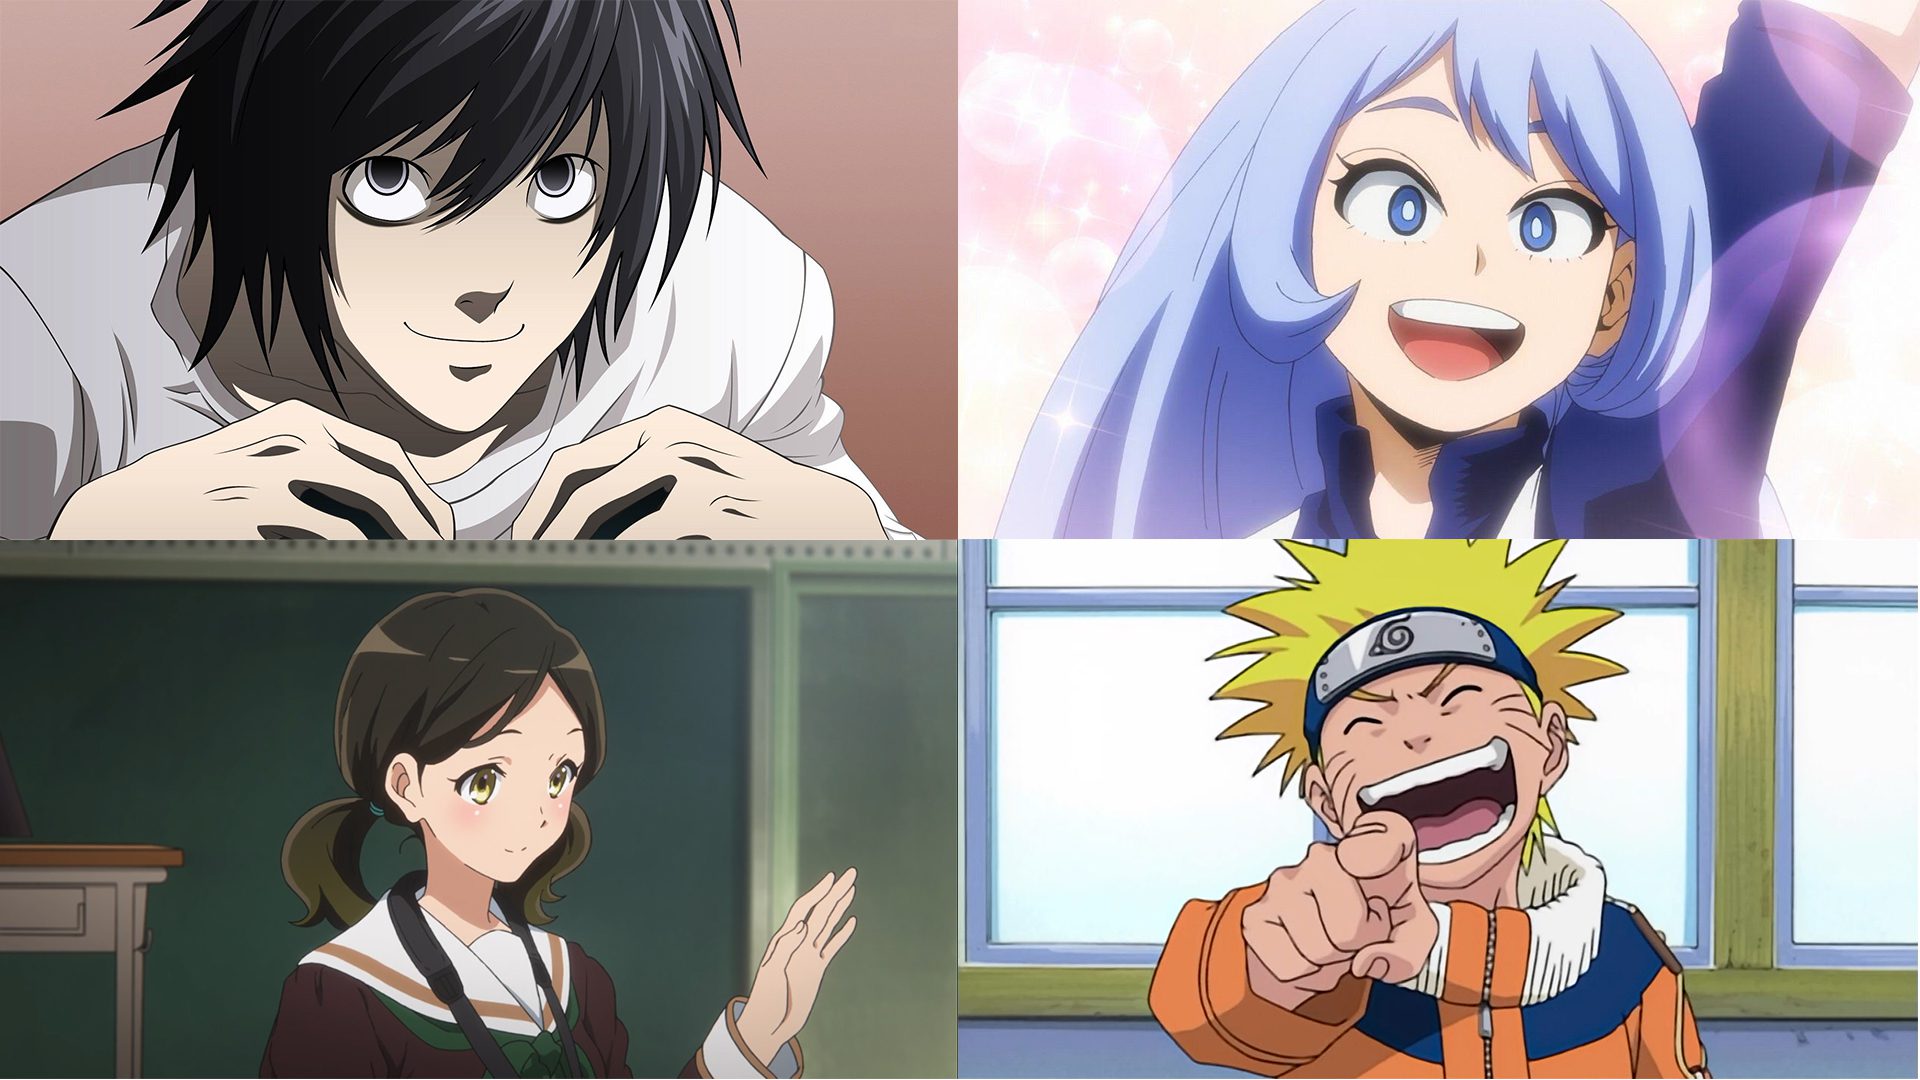 October Anime Birthdays: List Of Anime Characters Born In October